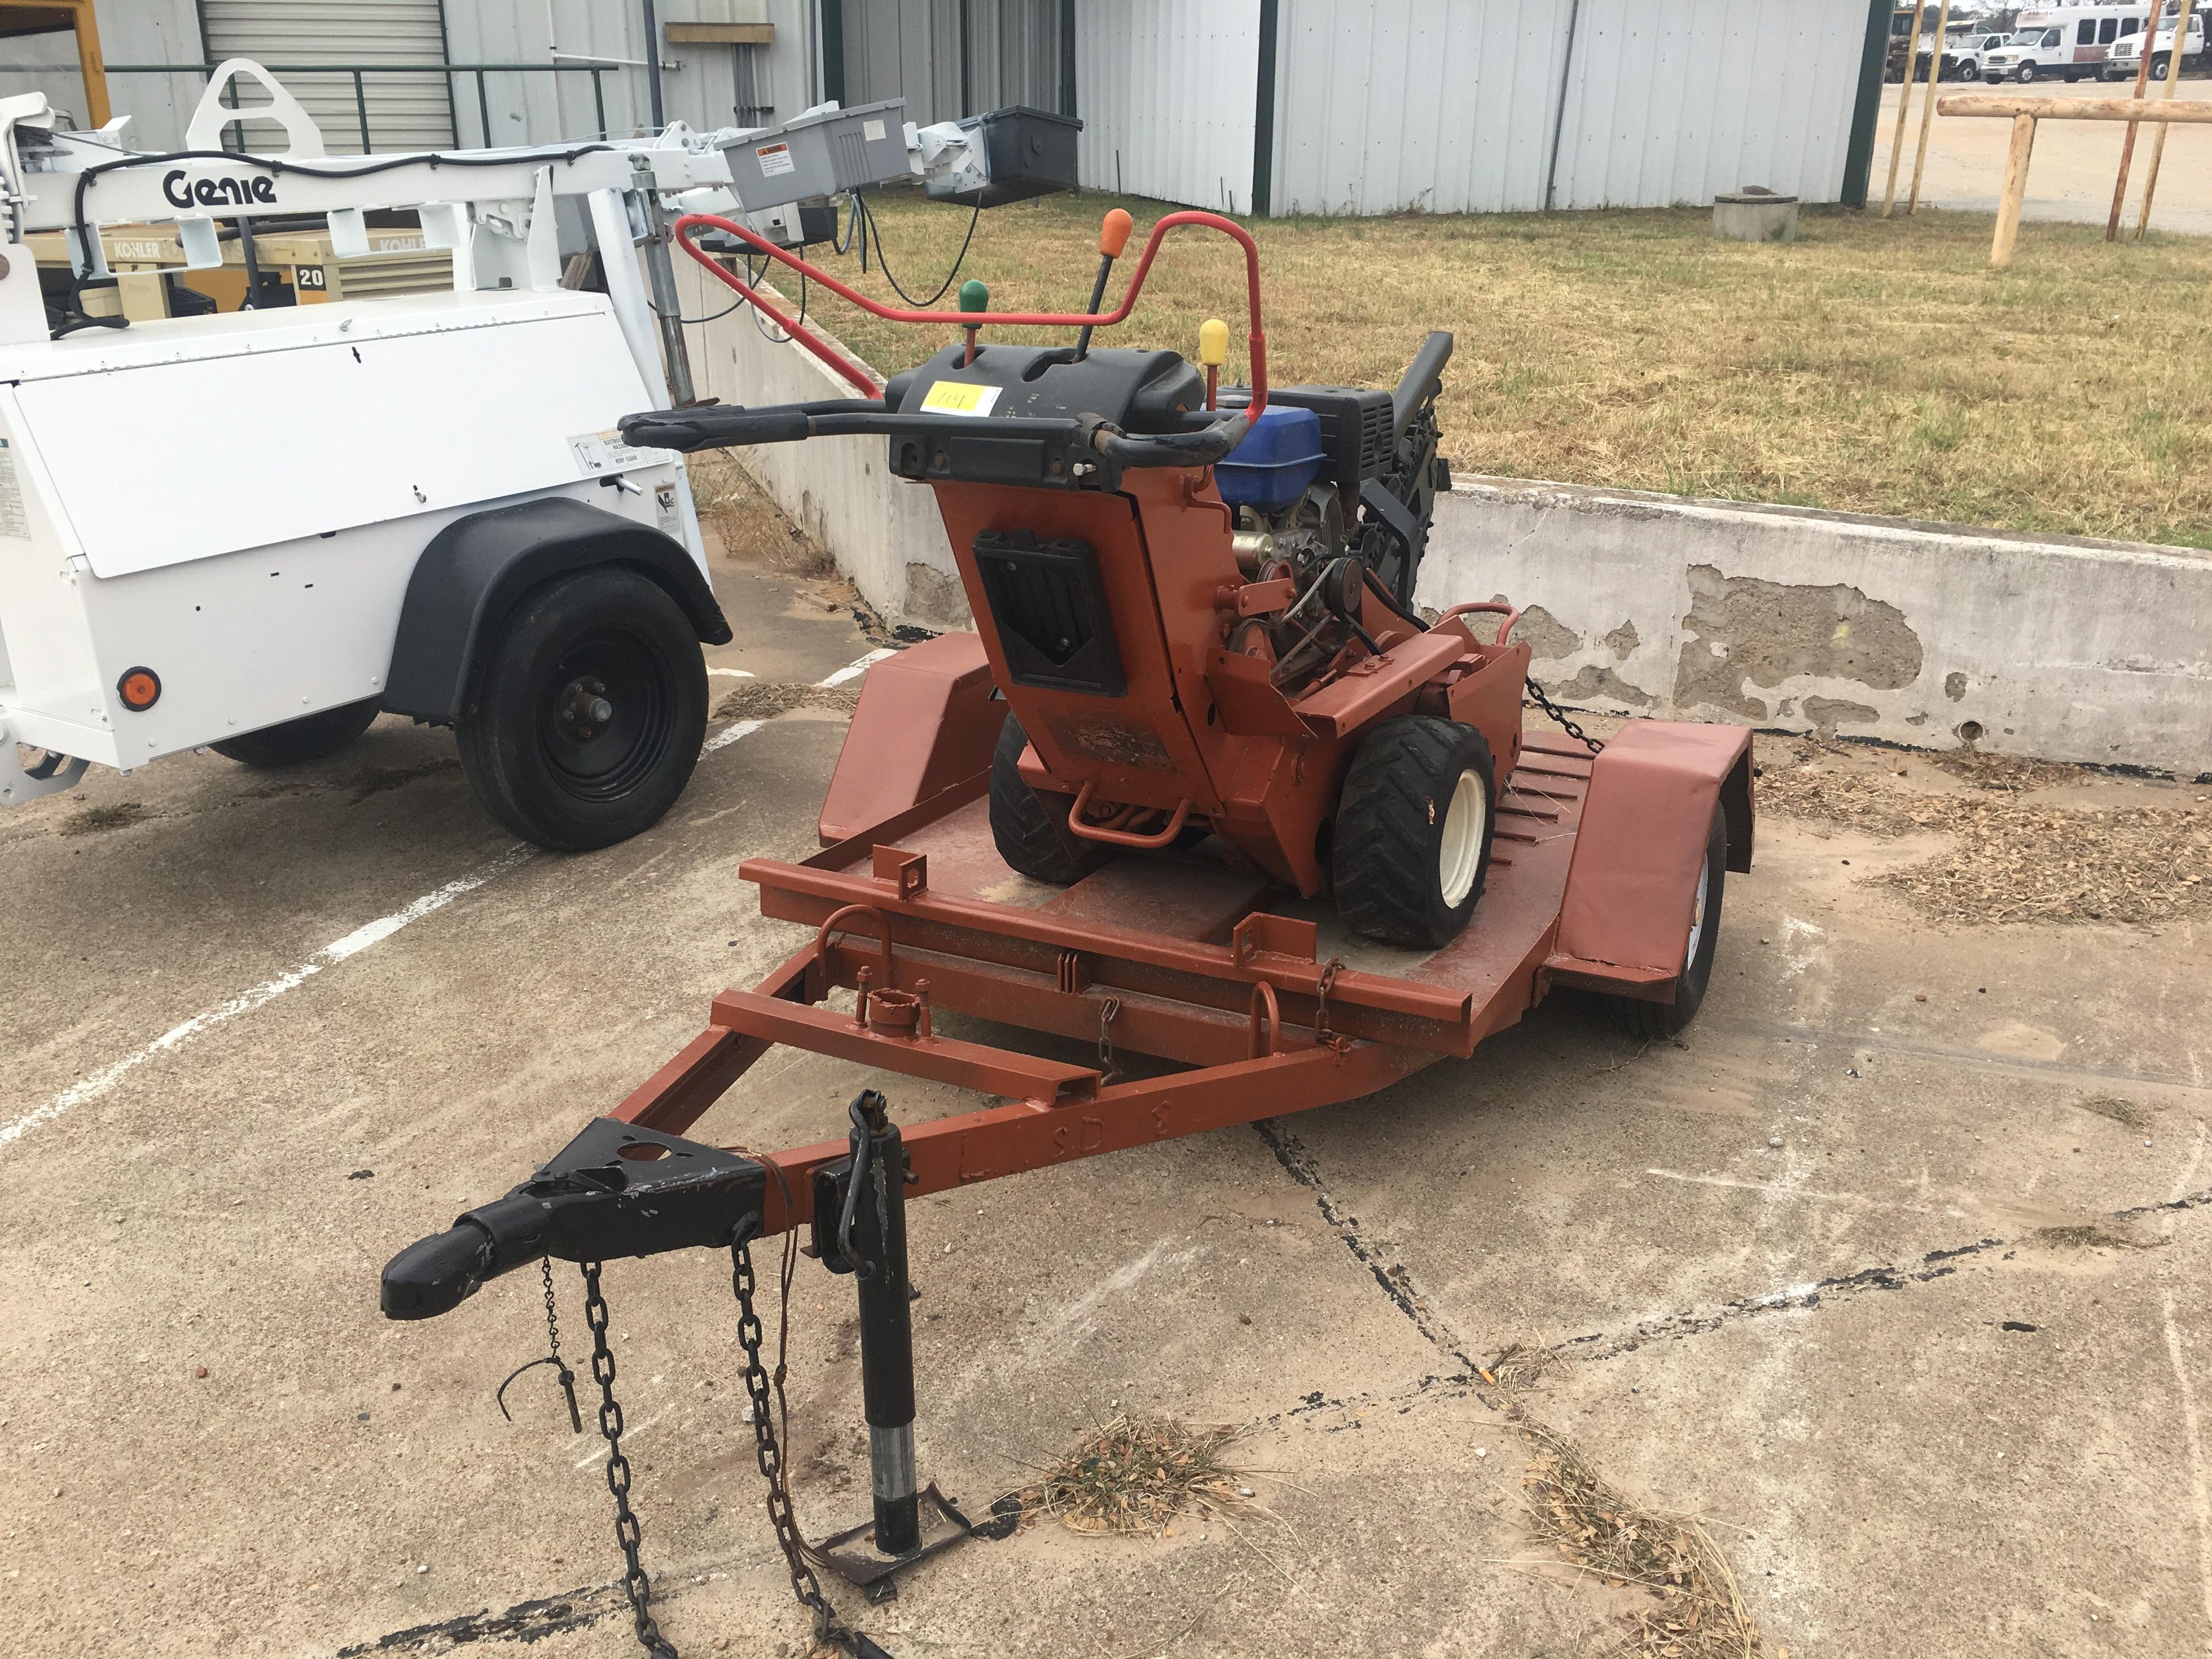 Ditch Witch 1030H Trencher on Trailer